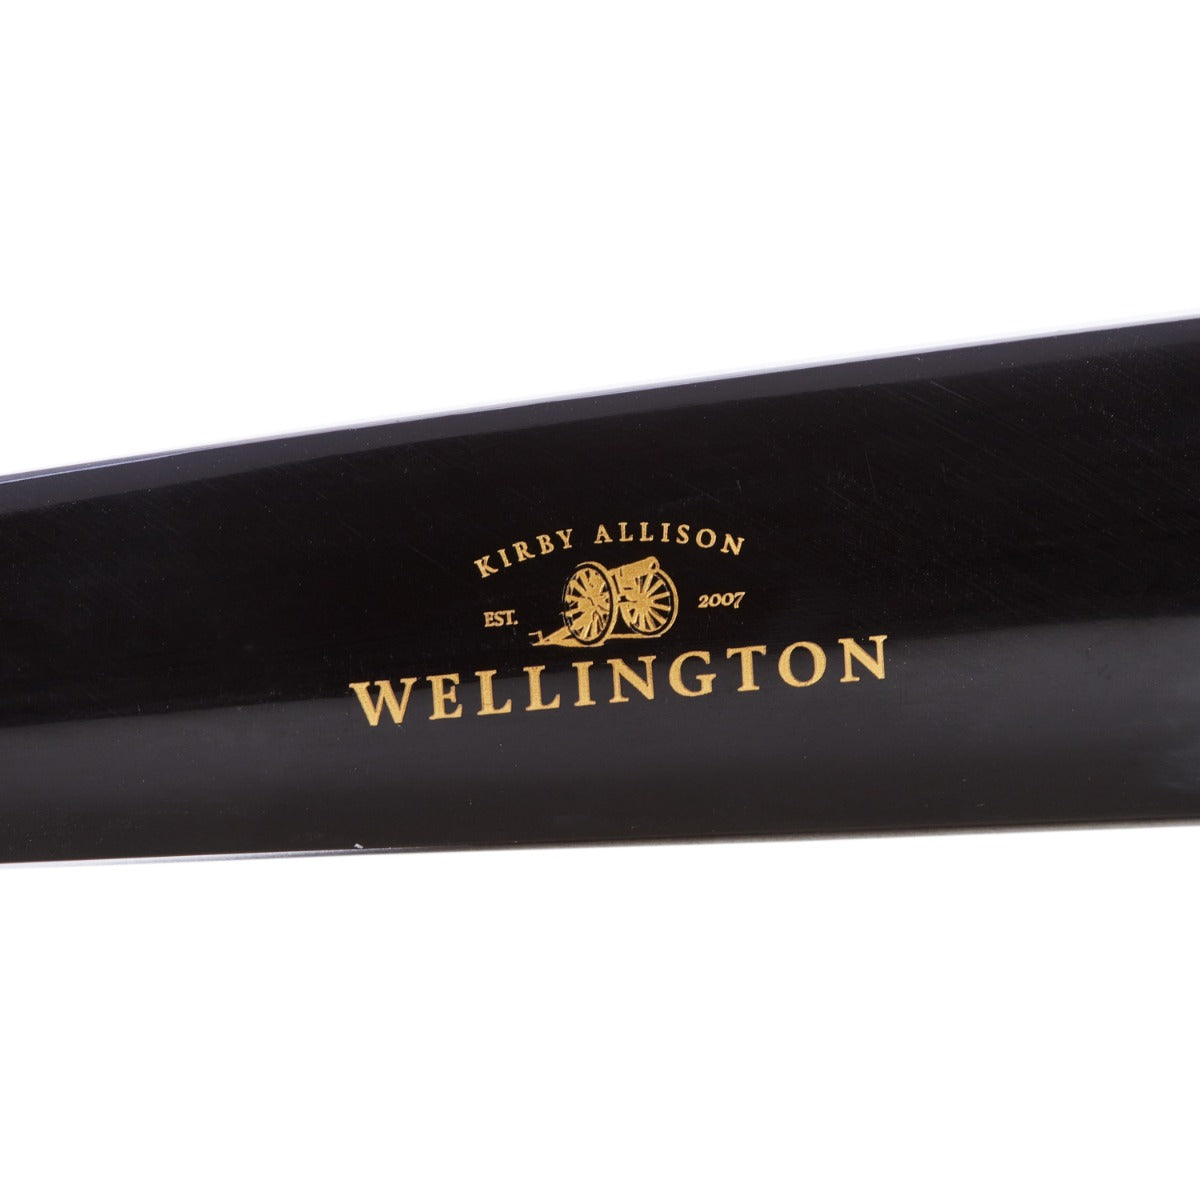 A Wellington 14 in Tip-End Shoehorn with the brand KirbyAllison.com.